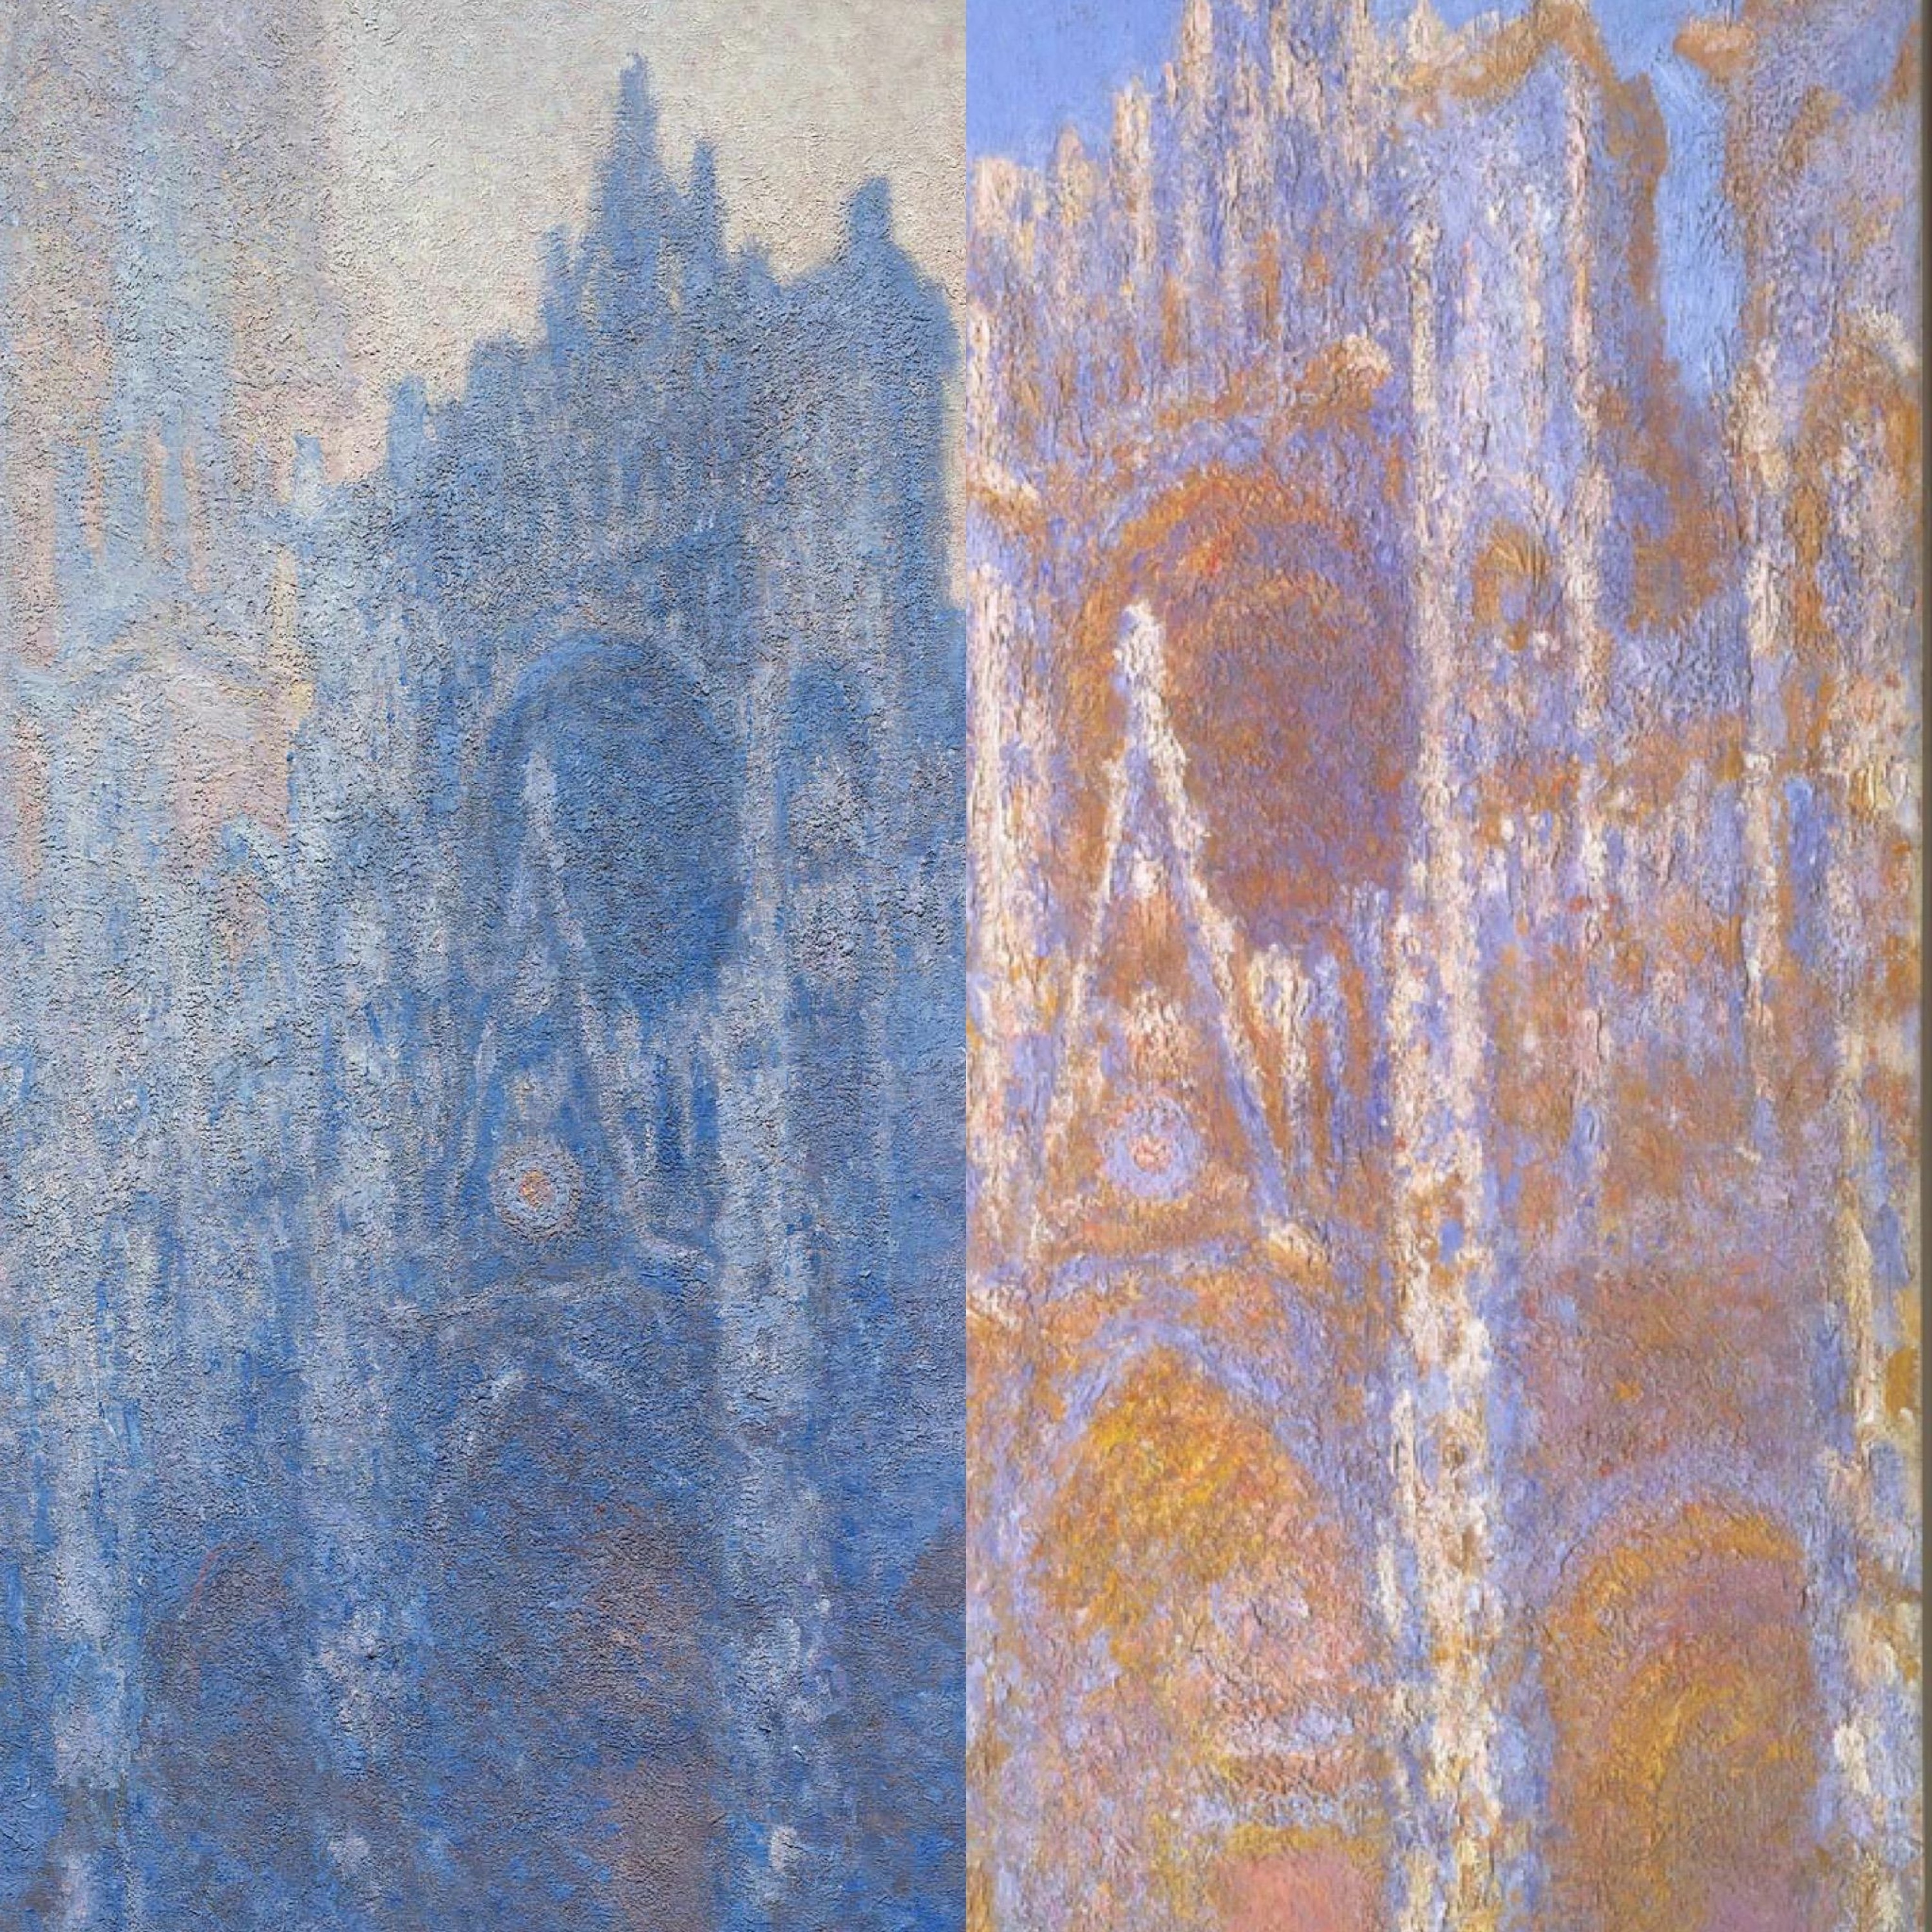 Ep. 7 - Claude Monet's "Rouen Cathedral" Series (1892-94)